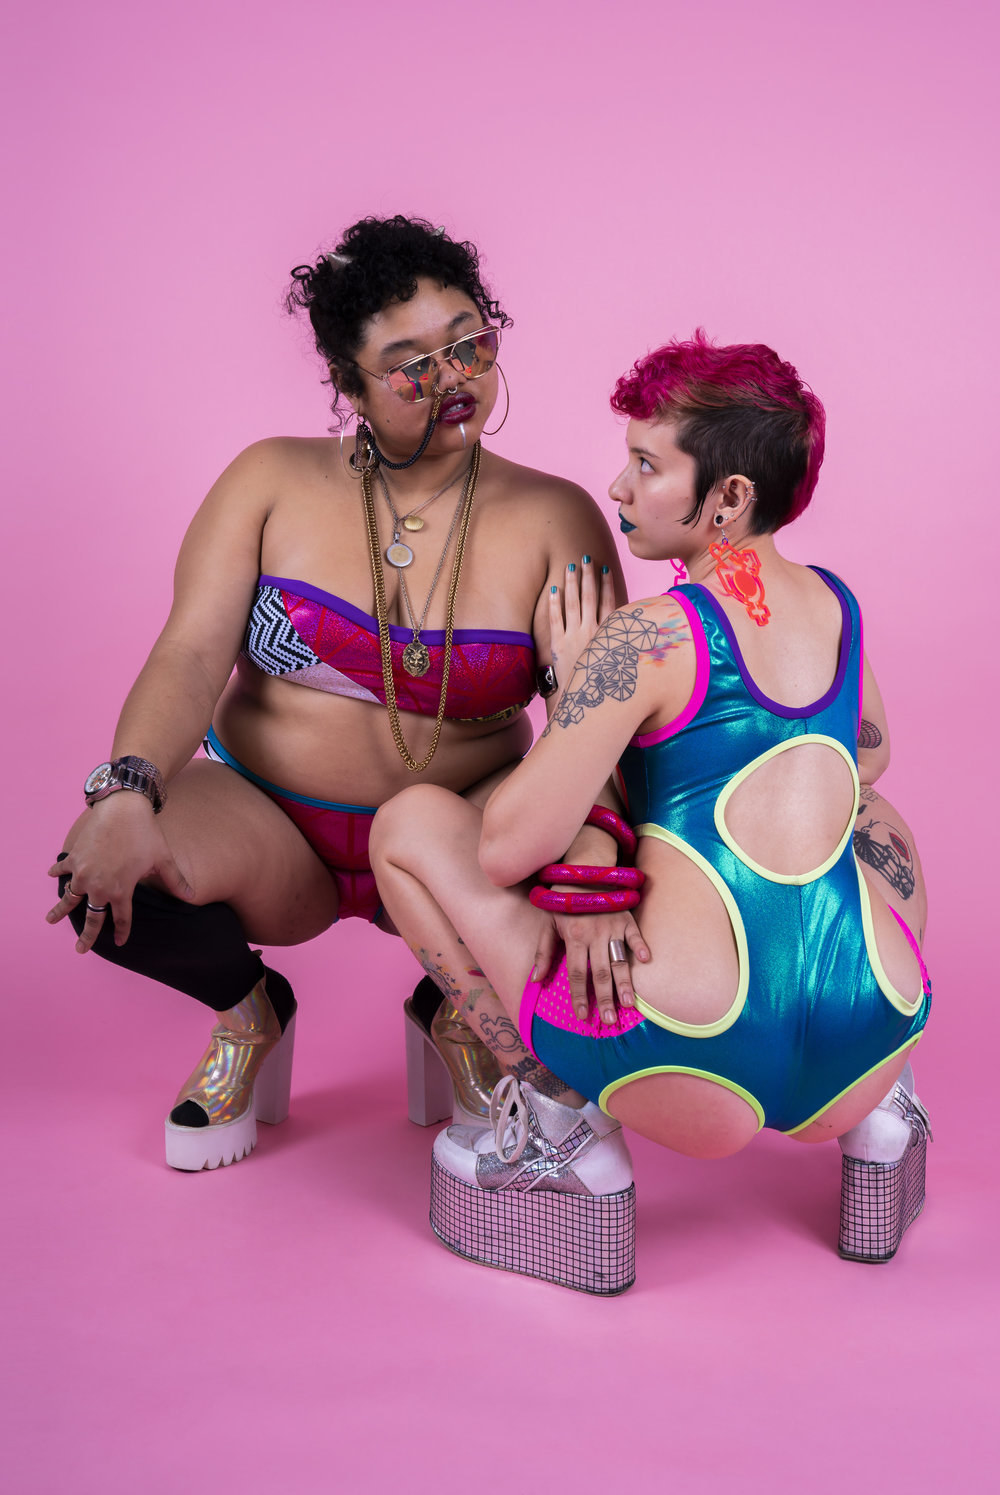 Two humans kneeling together, one in a brightly colored two piece bandeau set with jewelry, another in a shiny blue one-piece with multiple cut-outs, both wearing platform heels